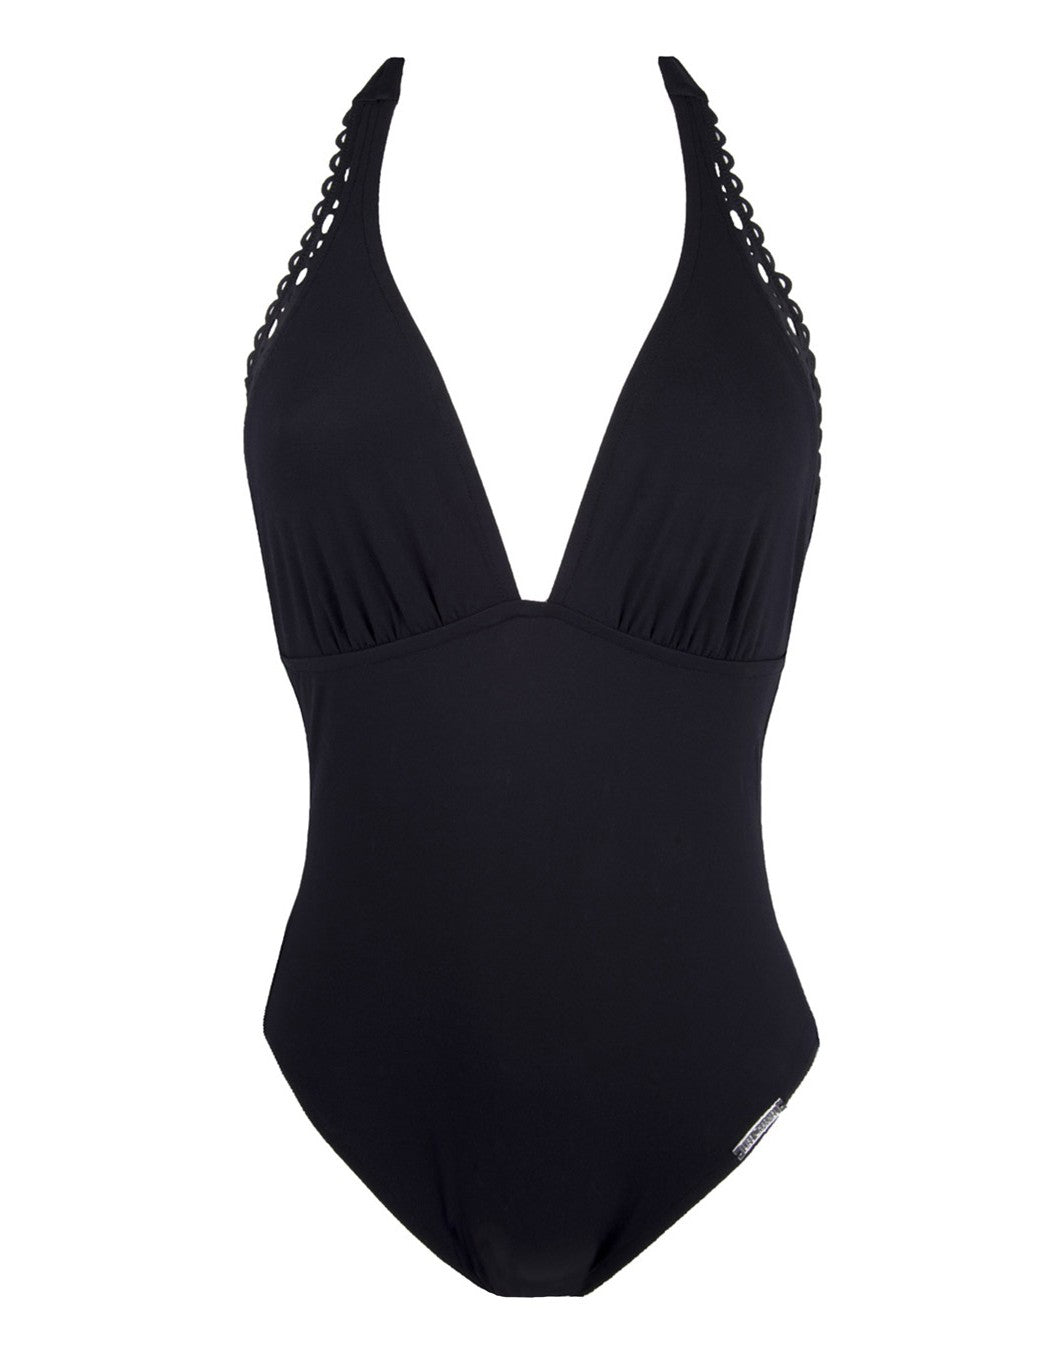 Black woman's  one piece swimsuit with low back